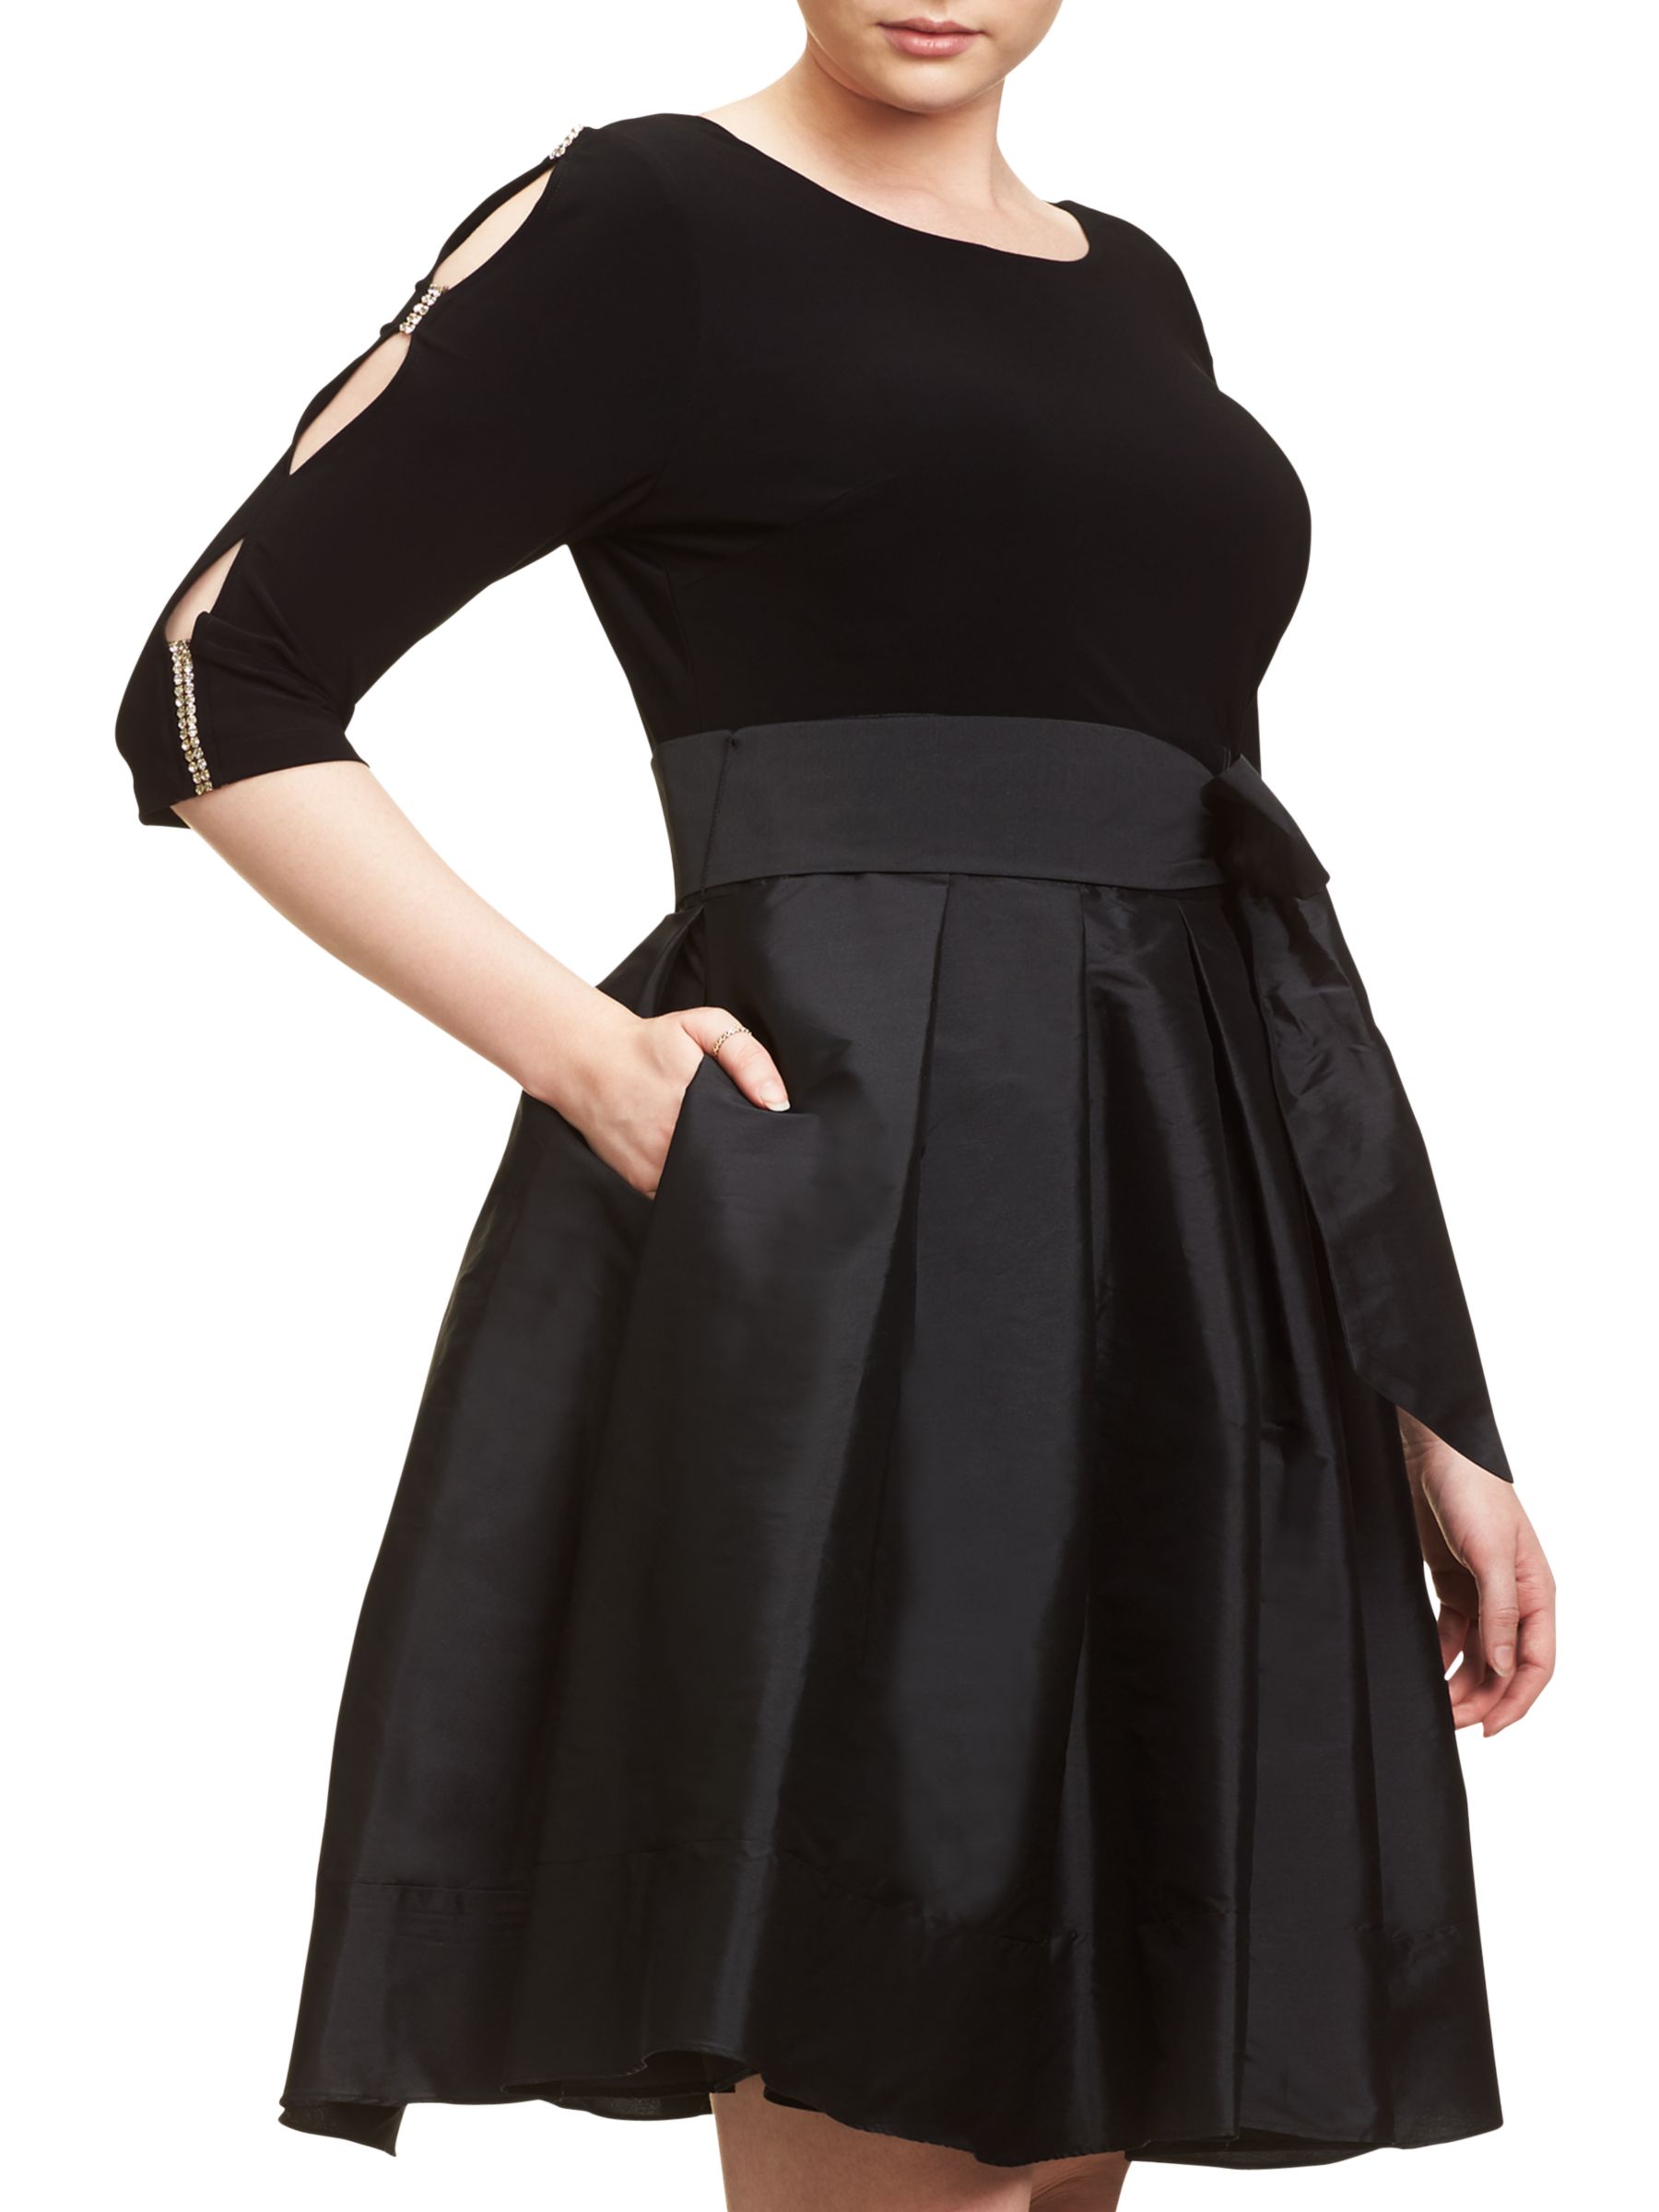 Adrianna Papell Plus Size Taffeta Fit And Flare Dress, Black